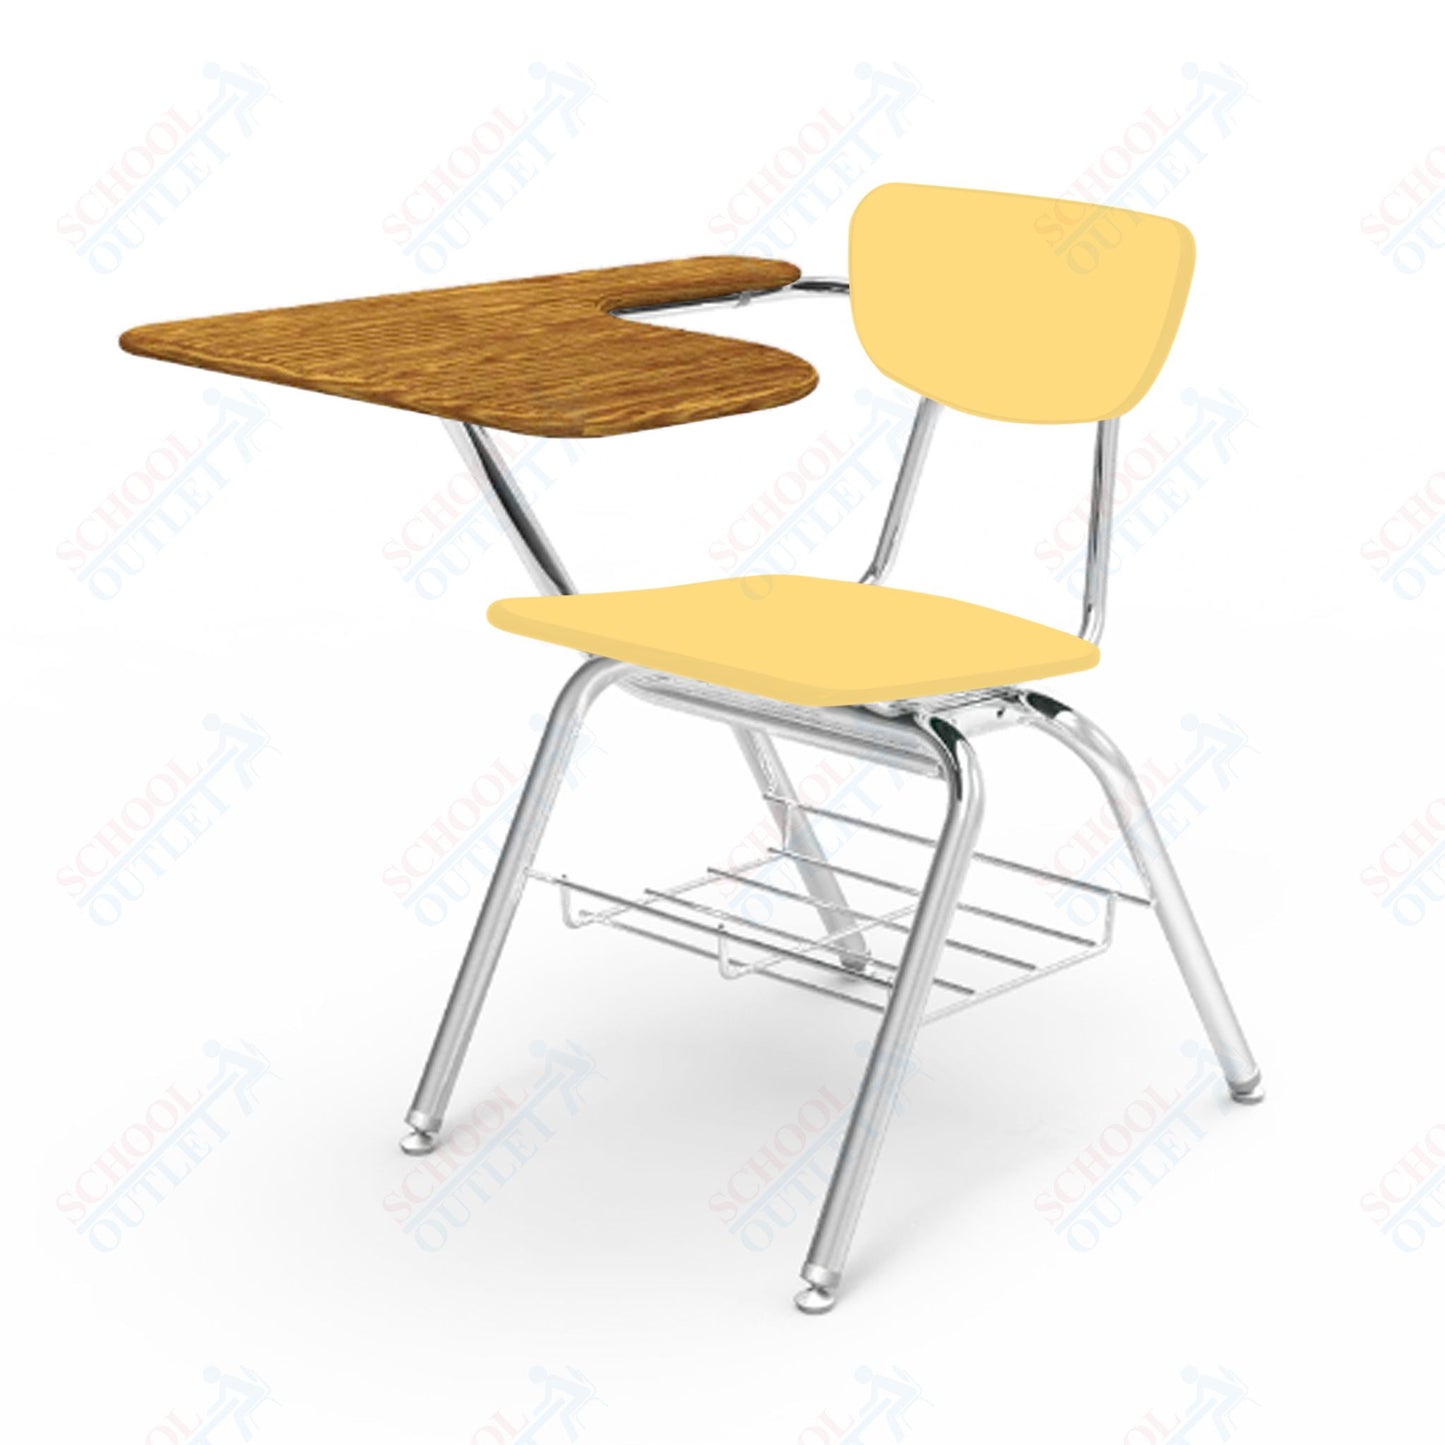 Virco 3700BRL Student Tablet Arm Chair Desk with 18" Hard Plastic Seat, Laminate Top and Bookrack for Schools and Classrooms